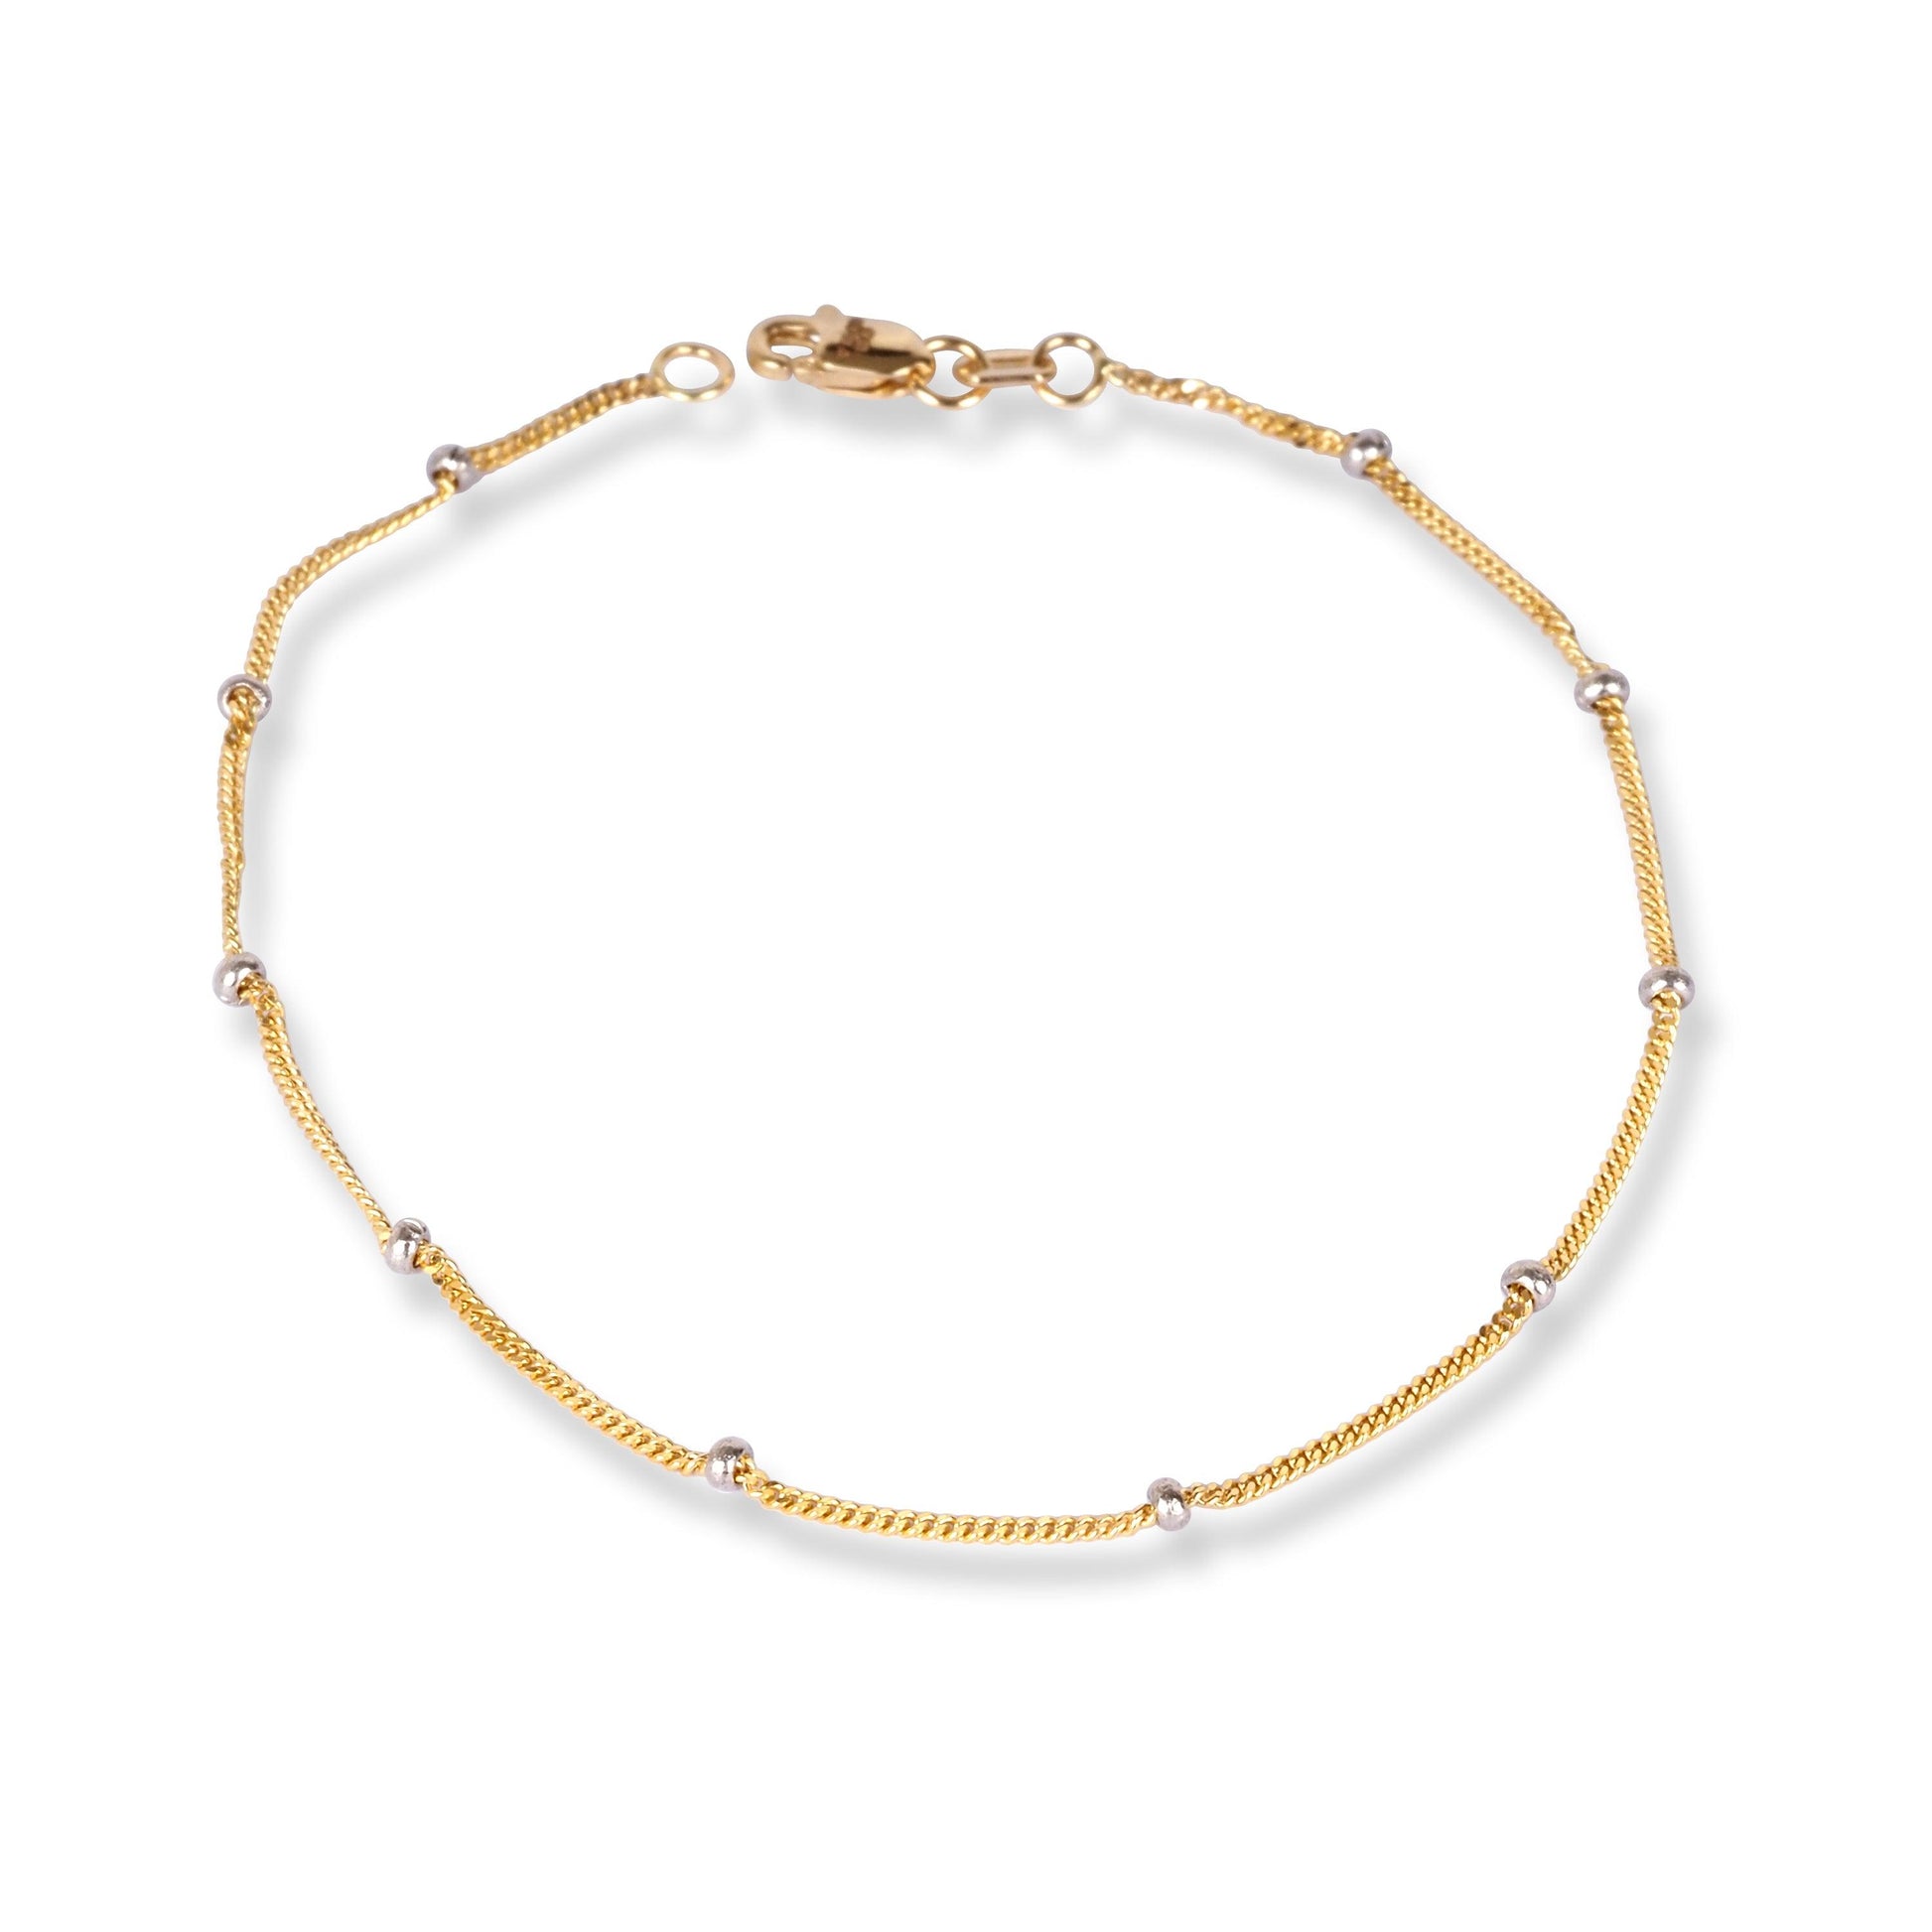 18ct Yellow Gold Bracelet with Rhodium-Plated Beads and Lobster Clasp LBR-8483 - Minar Jewellers